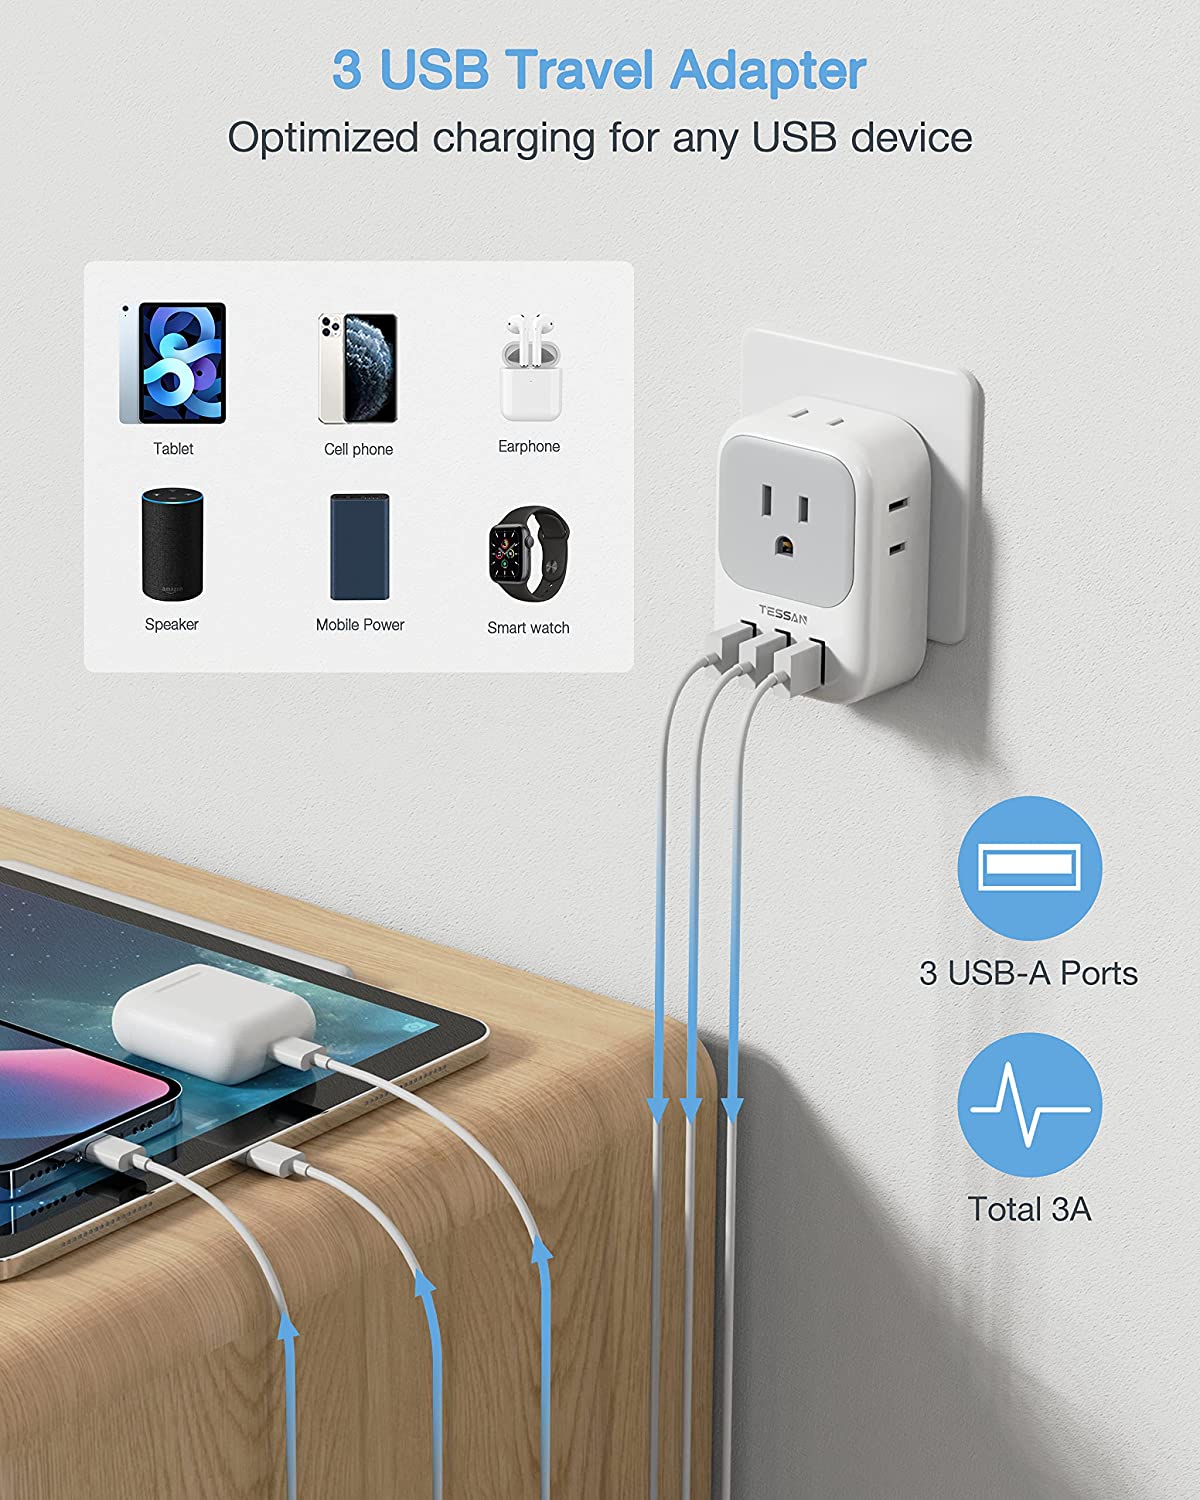 TESSAN US to Israel Travel Adaptor with 4 Outlets 3 USB Charging Ports